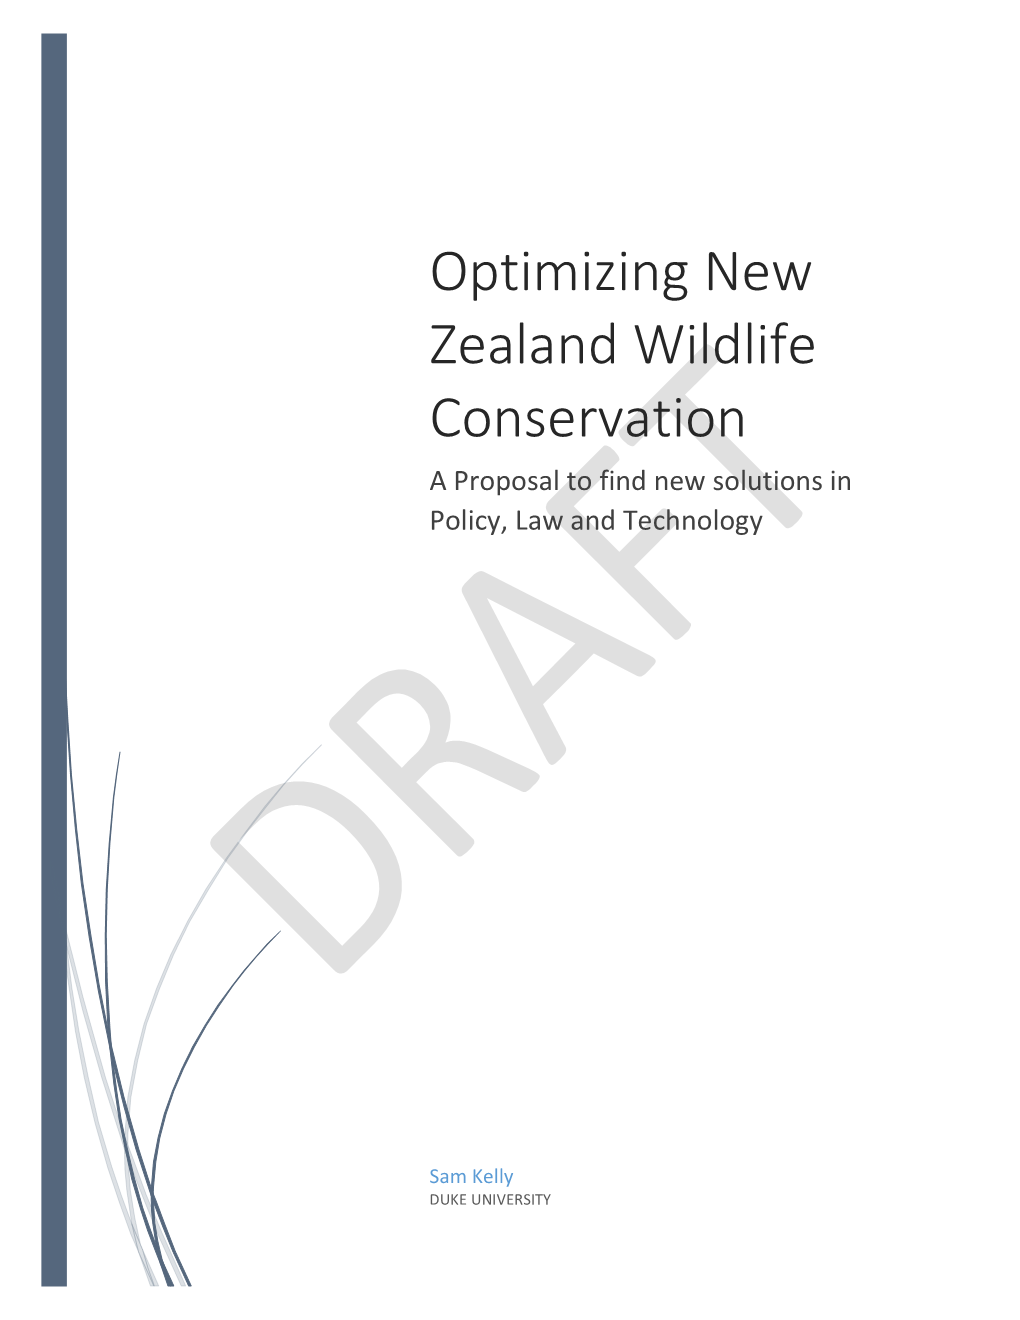 Optimizing New Zealand Wildlife Conservation a Proposal to Find New Solutions in Policy, Law and Technology